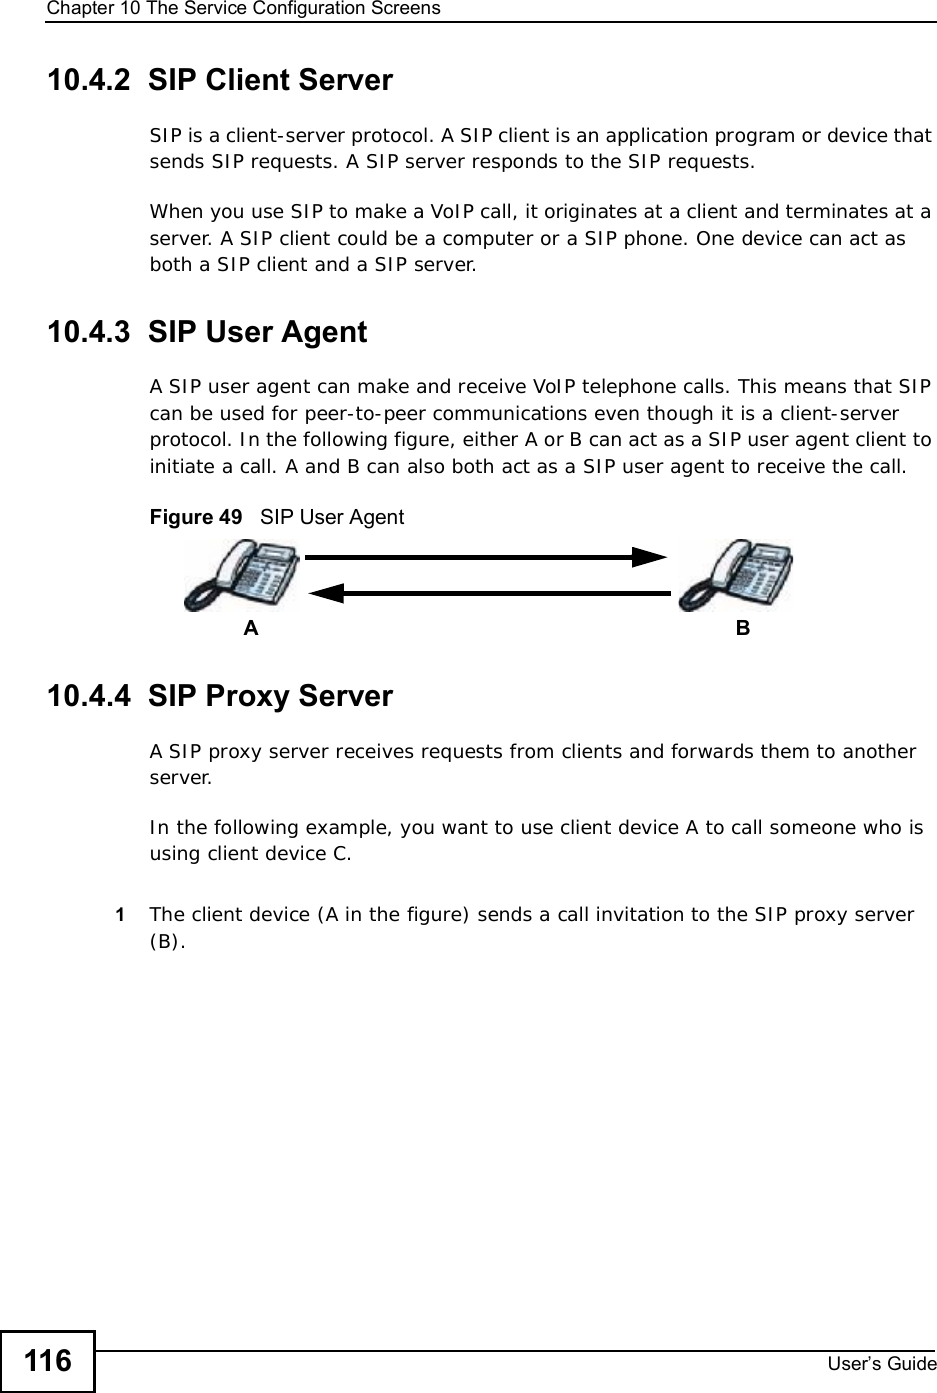 Chapter 10The Service Configuration ScreensUser s Guide11610.4.2  SIP Client ServerSIP is a client-server protocol. A SIP client is an application program or device that sends SIP requests. A SIP server responds to the SIP requests. When you use SIP to make a VoIP call, it originates at a client and terminates at a server. A SIP client could be a computer or a SIP phone. One device can act as both a SIP client and a SIP server. 10.4.3  SIP User Agent A SIP user agent can make and receive VoIP telephone calls. This means that SIP can be used for peer-to-peer communications even though it is a client-server protocol. In the following figure, either A or B can act as a SIP user agent client to initiate a call. A and B can also both act as a SIP user agent to receive the call.Figure 49   SIP User Agent10.4.4  SIP Proxy ServerA SIP proxy server receives requests from clients and forwards them to another server.In the following example, you want to use client device A to call someone who is using client device C. 1The client device (A in the figure) sends a call invitation to the SIP proxy server (B).AB